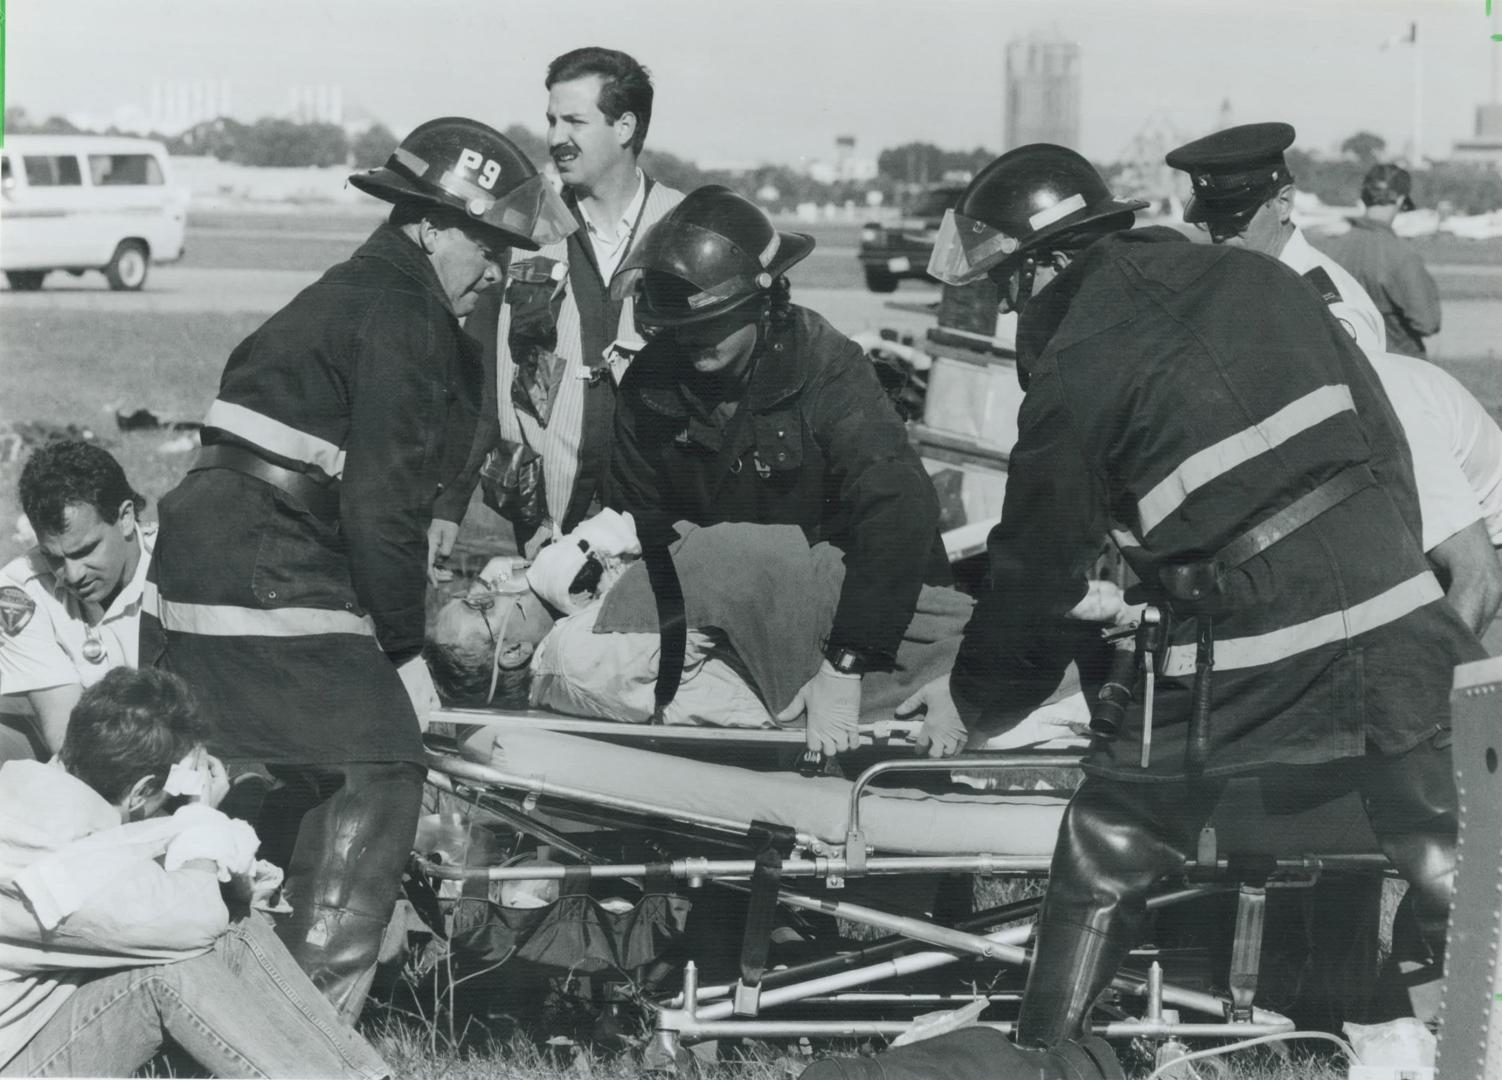 Just testing. Fire and ambulance crews attend to victims yesterday after a mock plane crash at the Toronto Island Airport. In the simulated disaster, (...)